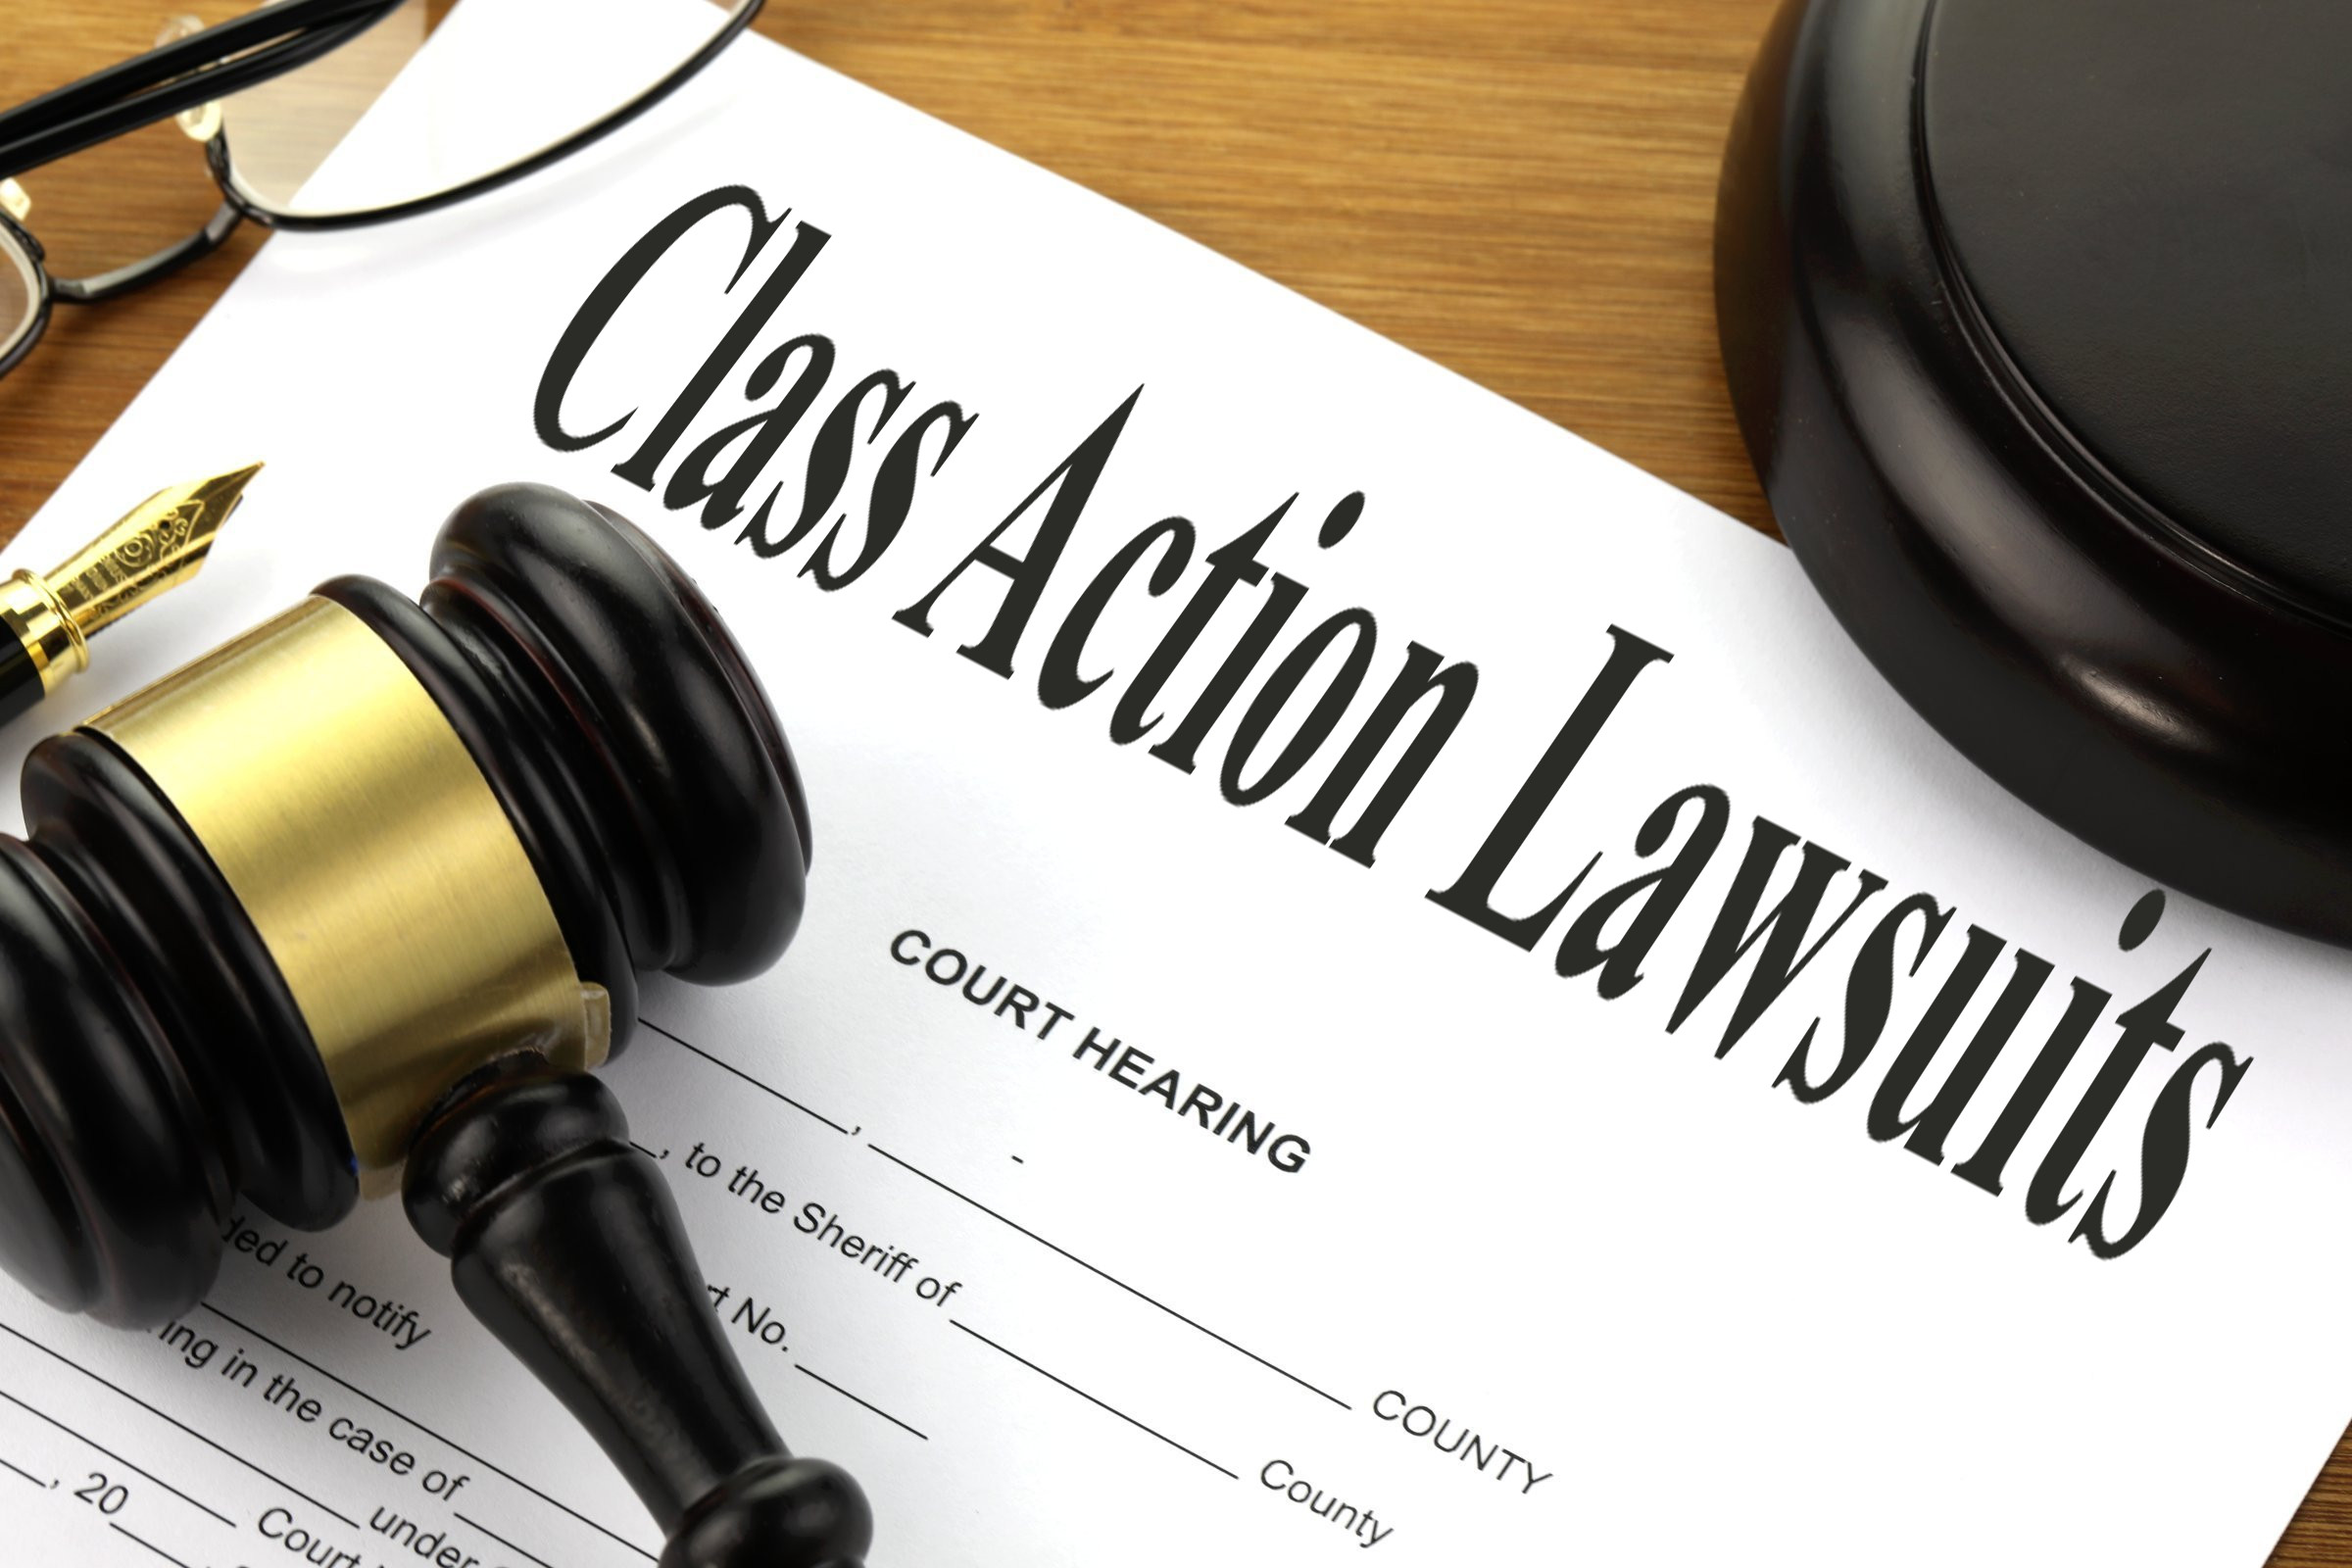 REMINDER: Class action lawsuits have implications for investors